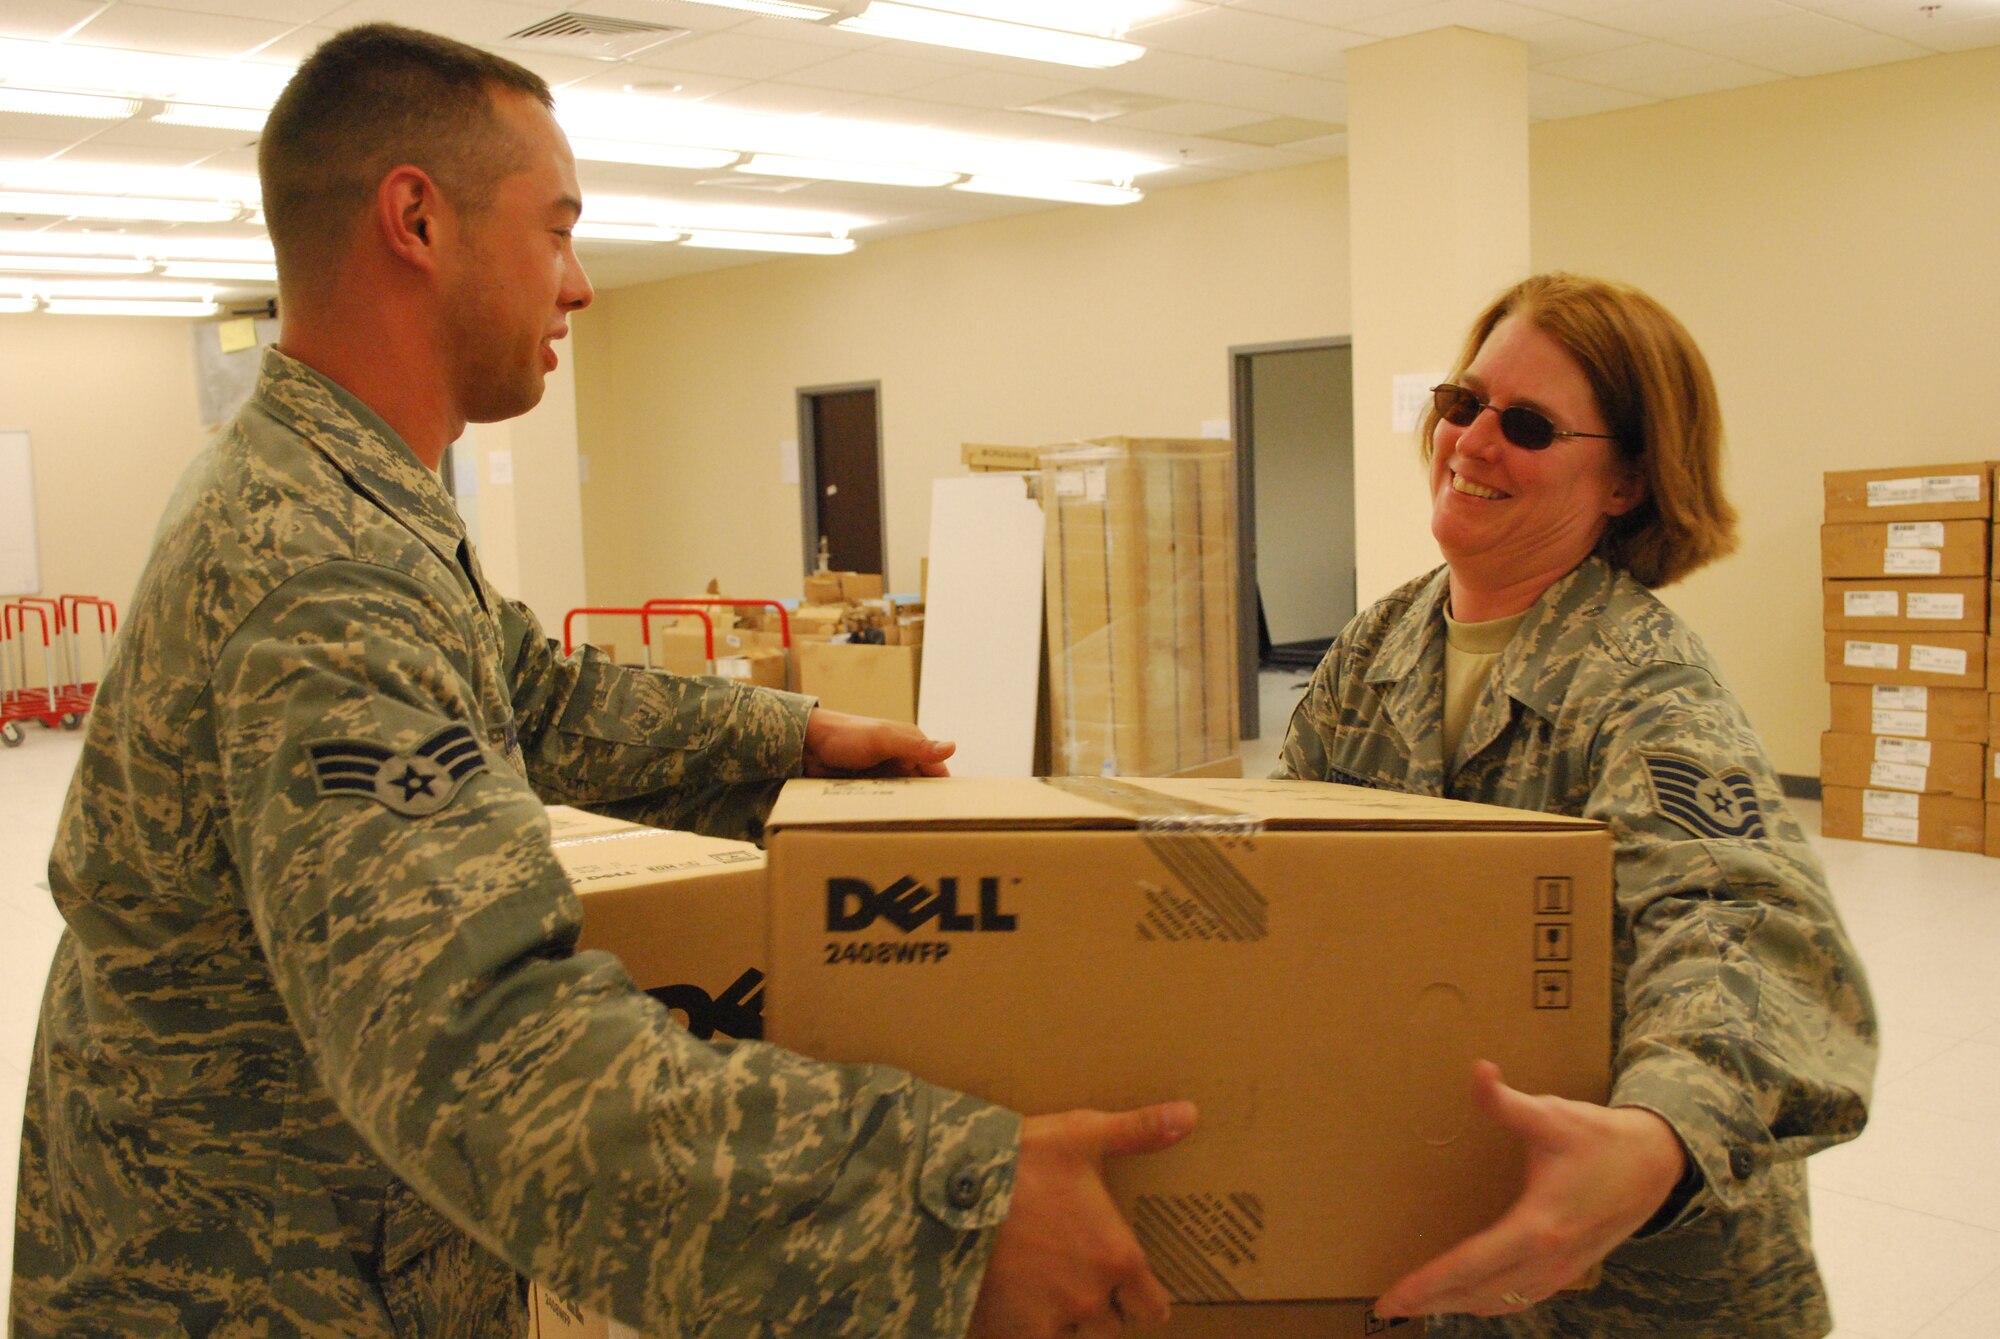 Senior Airman Sean Vaclavik and Tech. Sgt. Dara Febres, communications computer systems craftsmen, 103rd Air and Space Operations Group, receive a shipment of mission critical computer equipment for the new Combined Air Operations Center facility in Southwest Asia May 29, 2009.  The Airmen deployed as part of an eight-member team focused on enhancing command and control capabilities for Air Force operations in theater.  (U.S. Air Force photo by Lt. Col. Reid Christopherson)